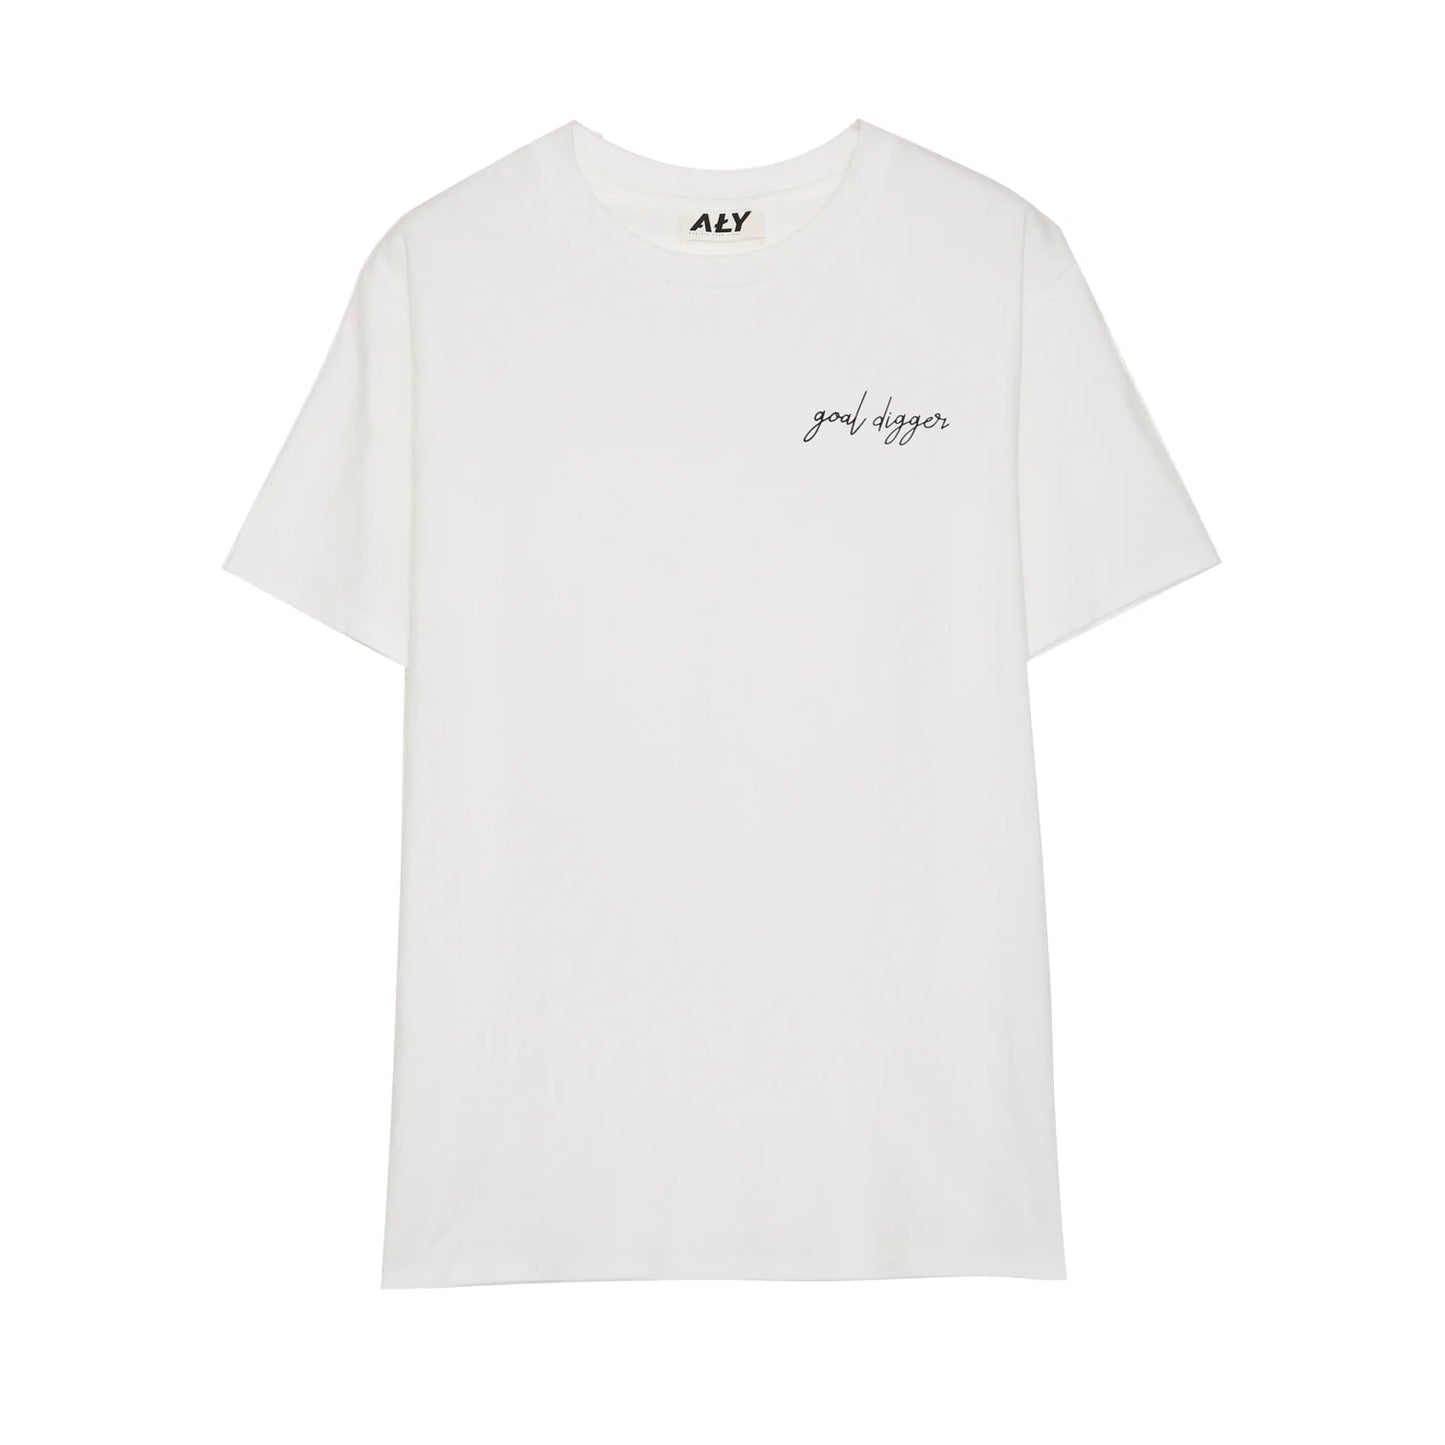 Aly Good Vibes - Goal Digger Tee (Adult Size) (White)